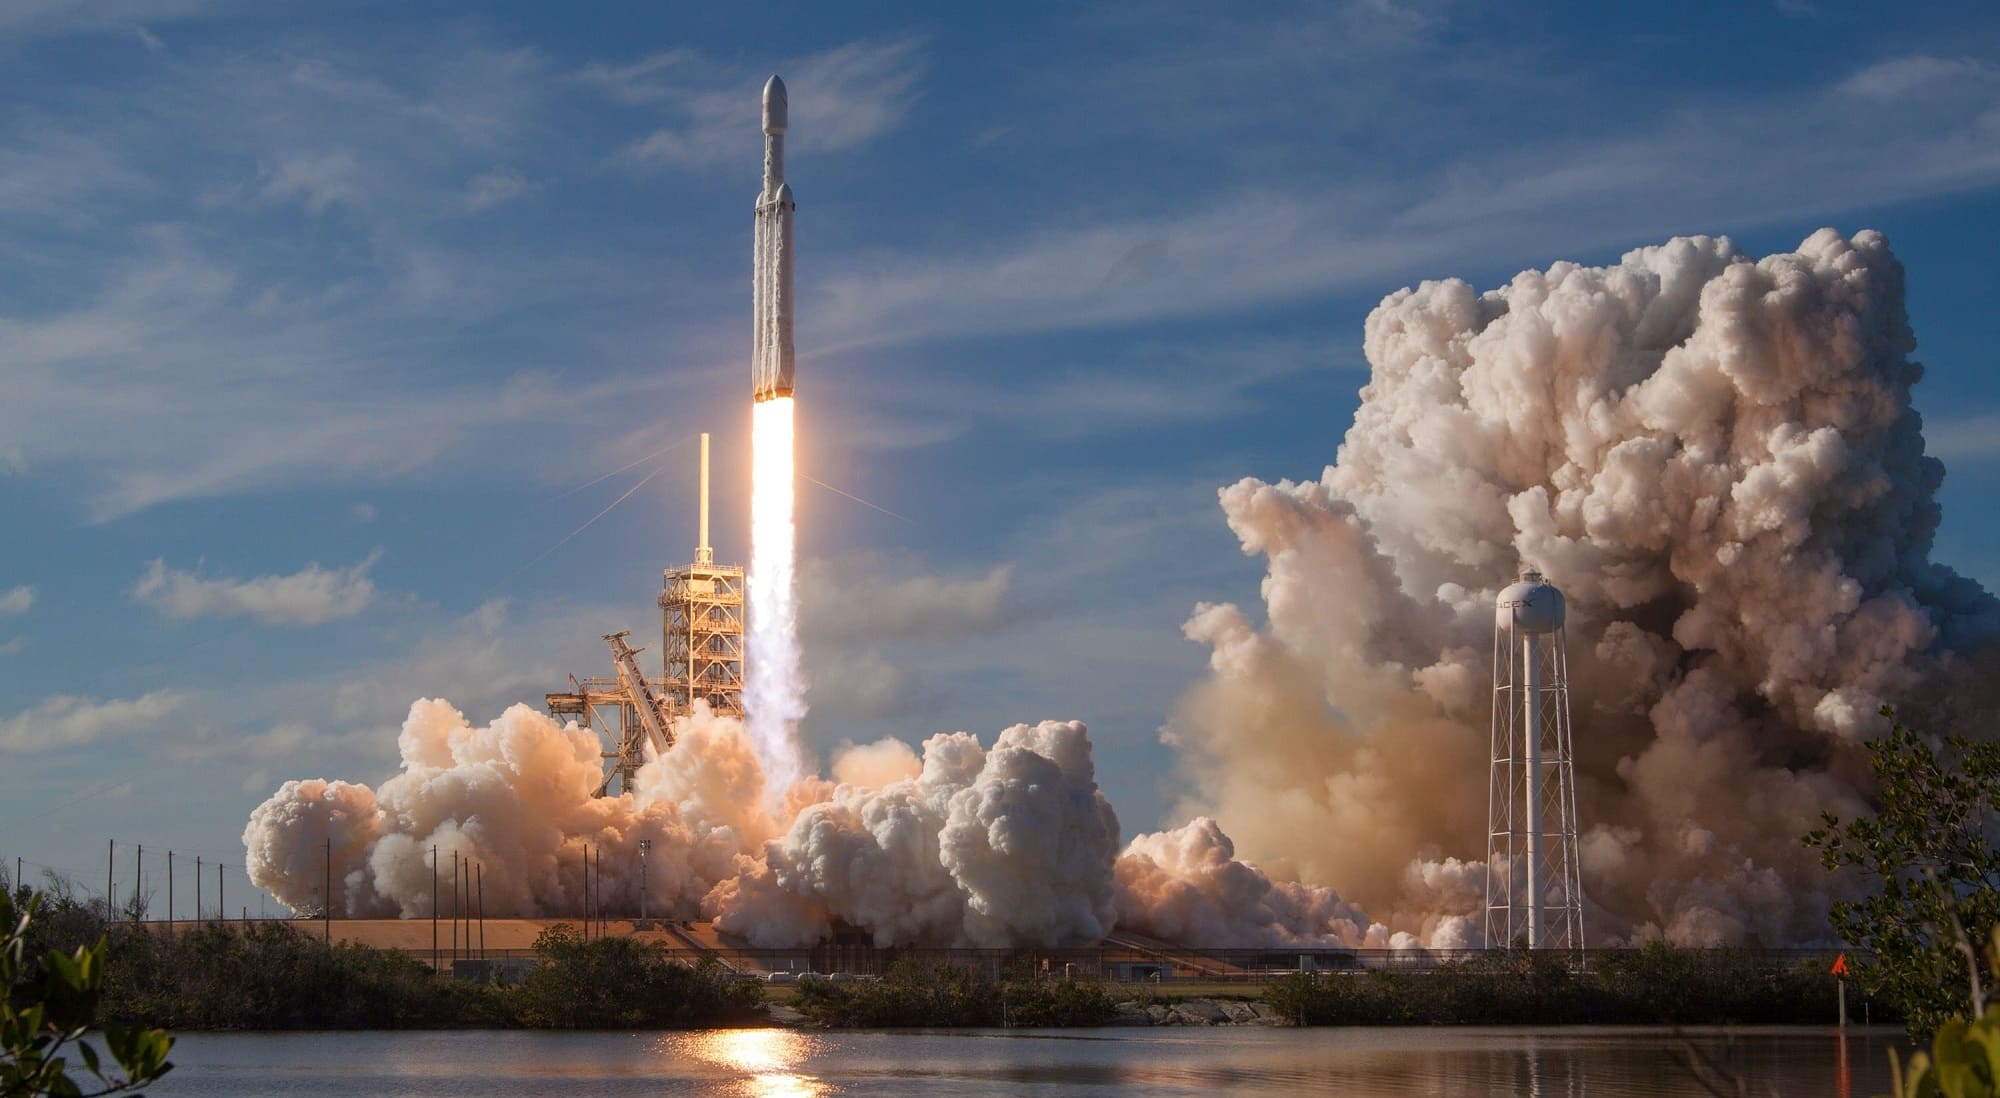 Elon Musk Approves: Steel and Other Metals in Rocket Construction